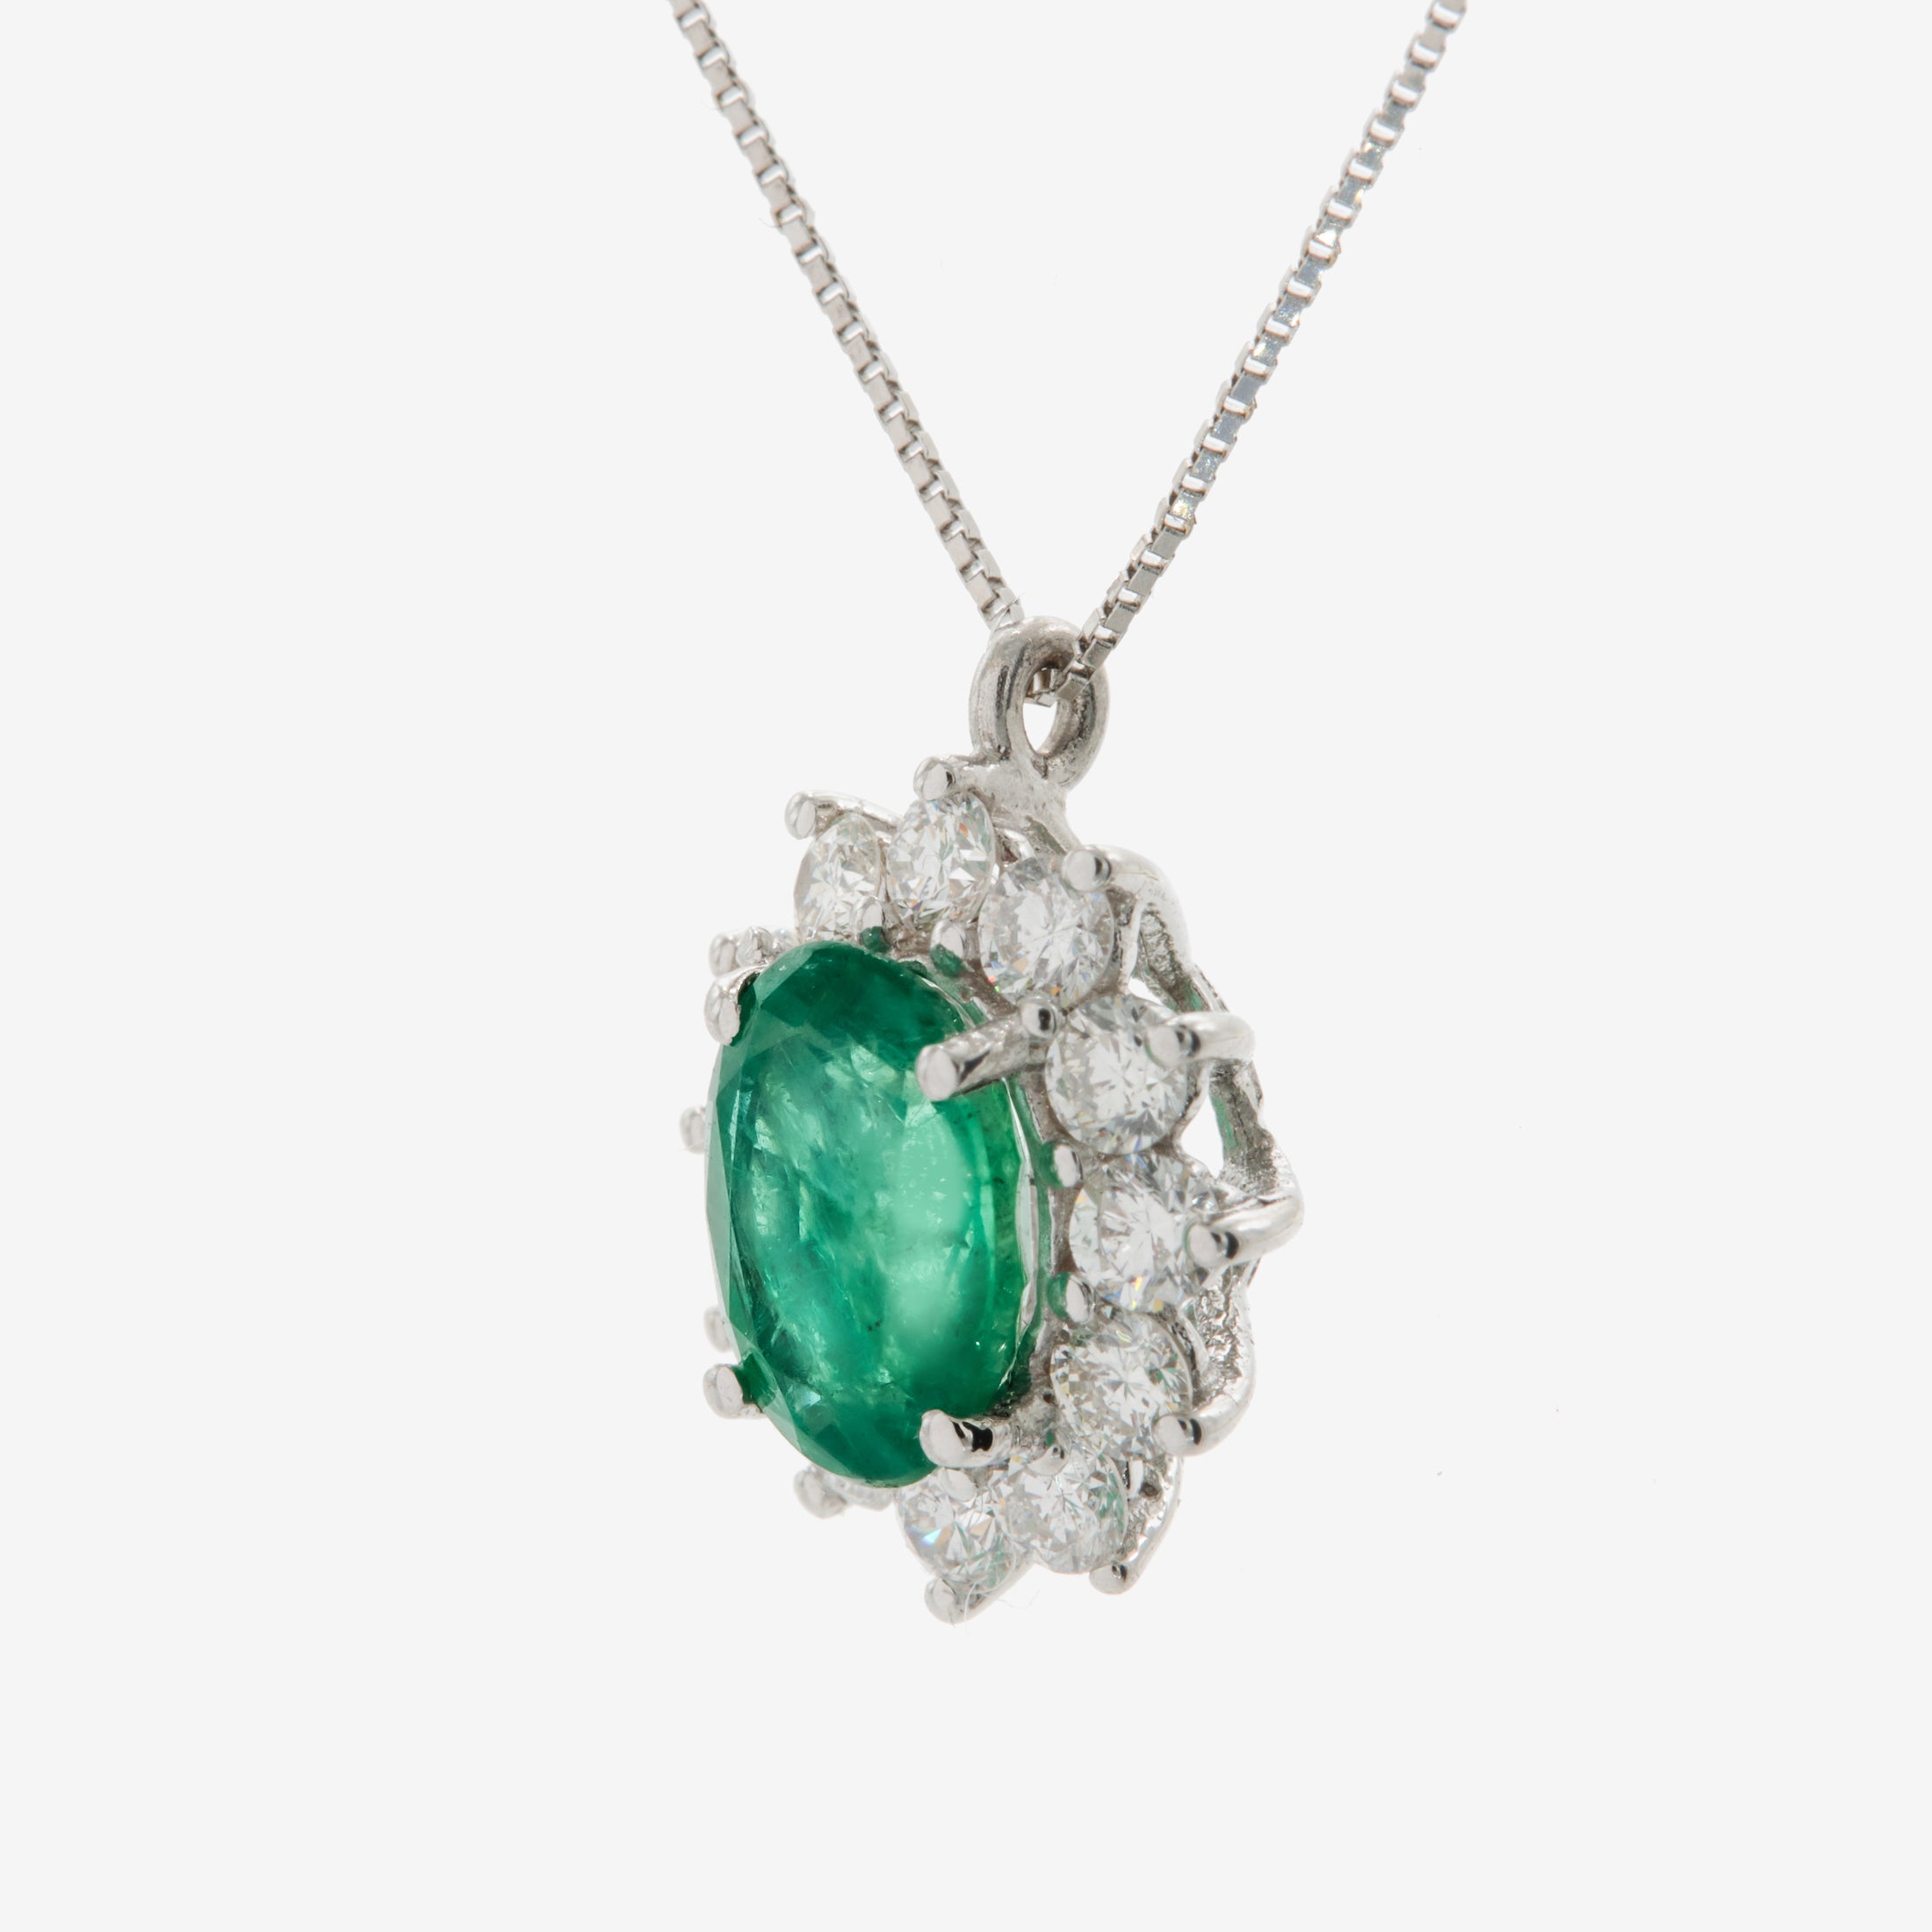 Huna necklace with emerald and diamonds